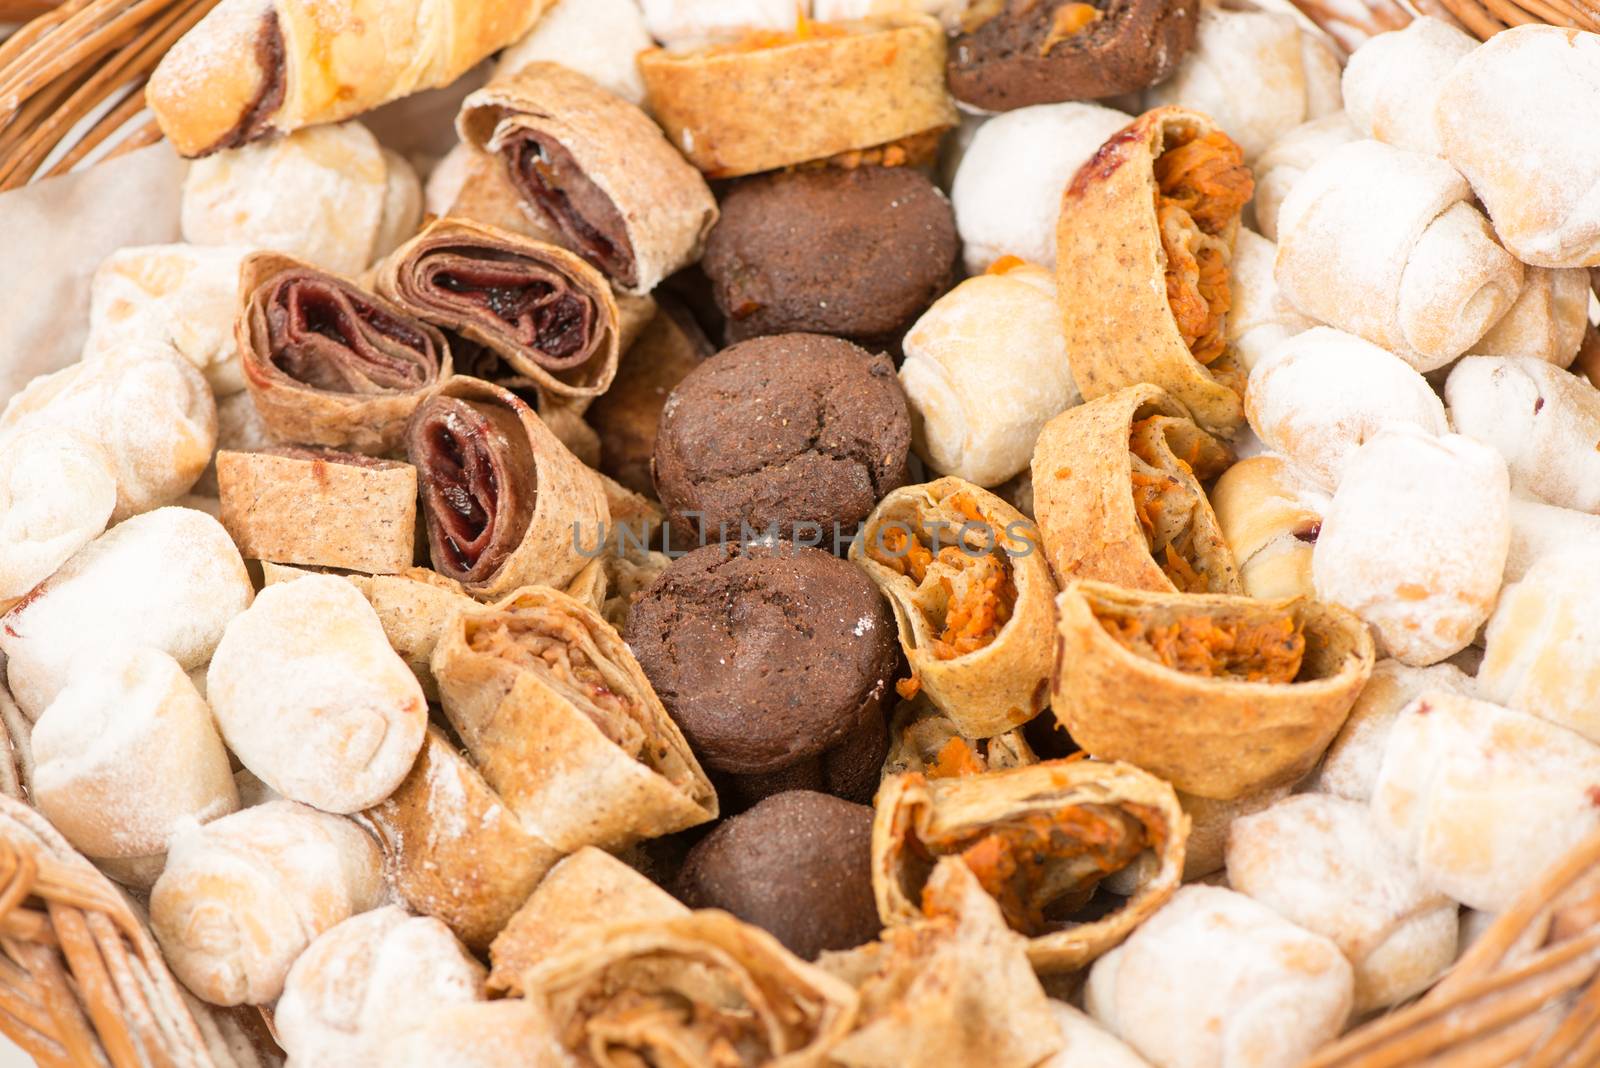 Close-up of sweet bakery products in a wicker basket.